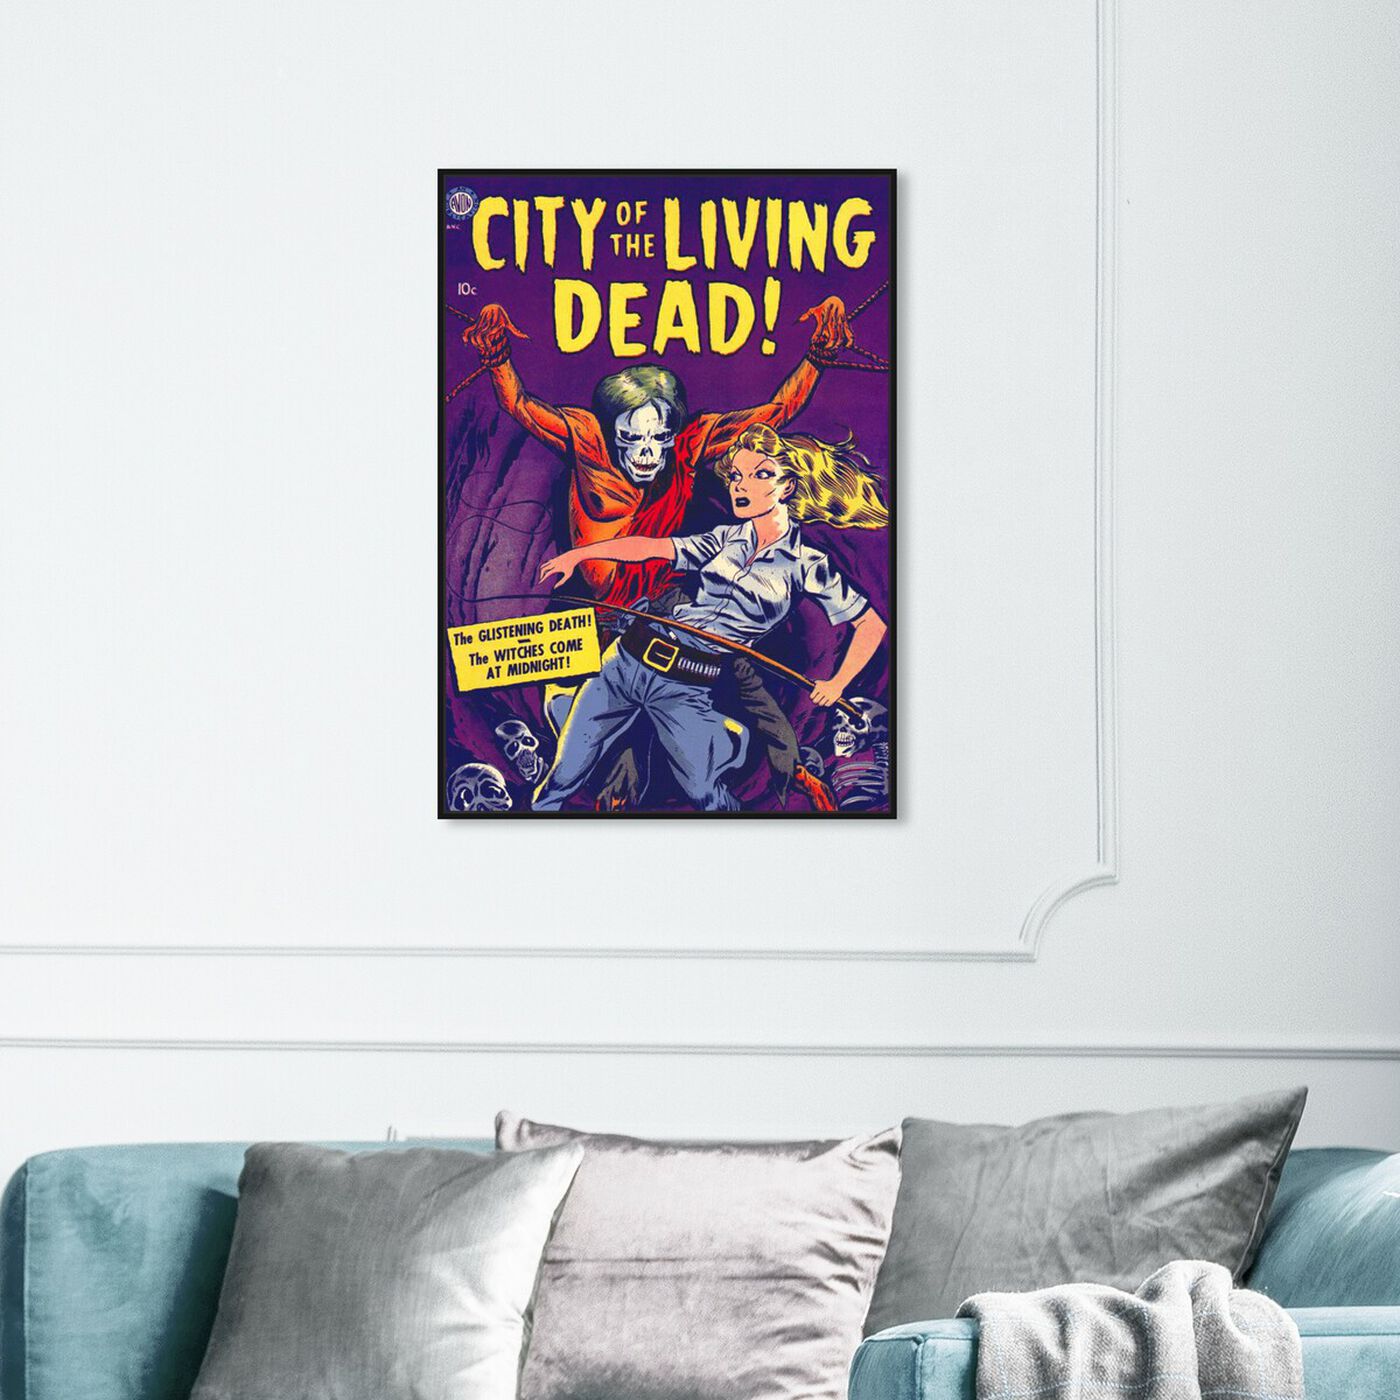 Hanging view of City Of The Living Dead featuring advertising and comics art.